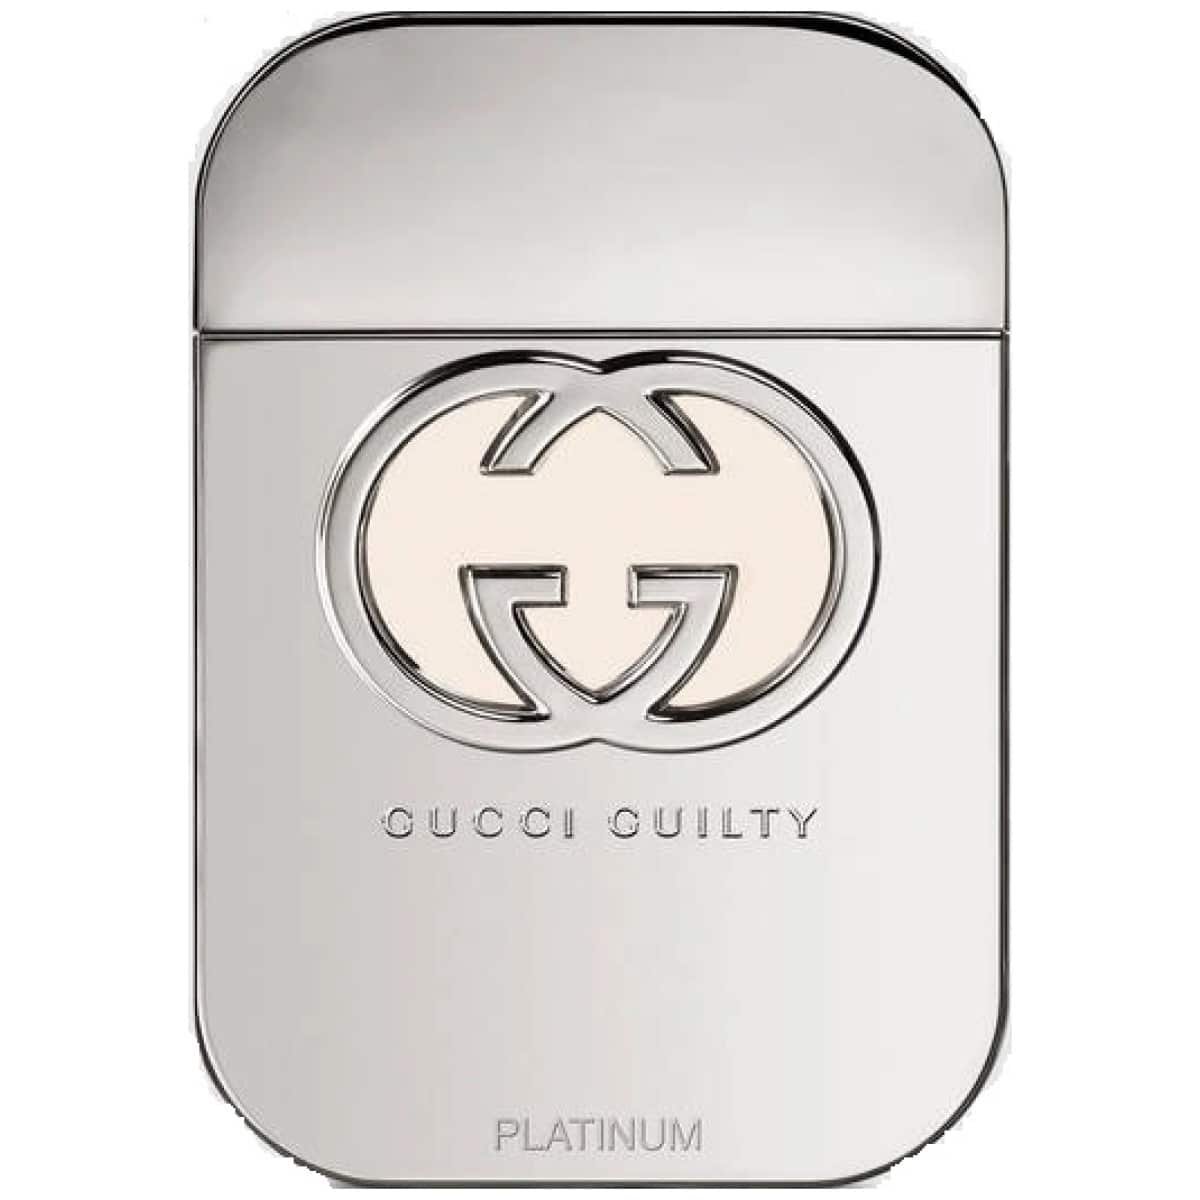 Gucci Guilty Platinum EDT Perfume For Women 75 ml